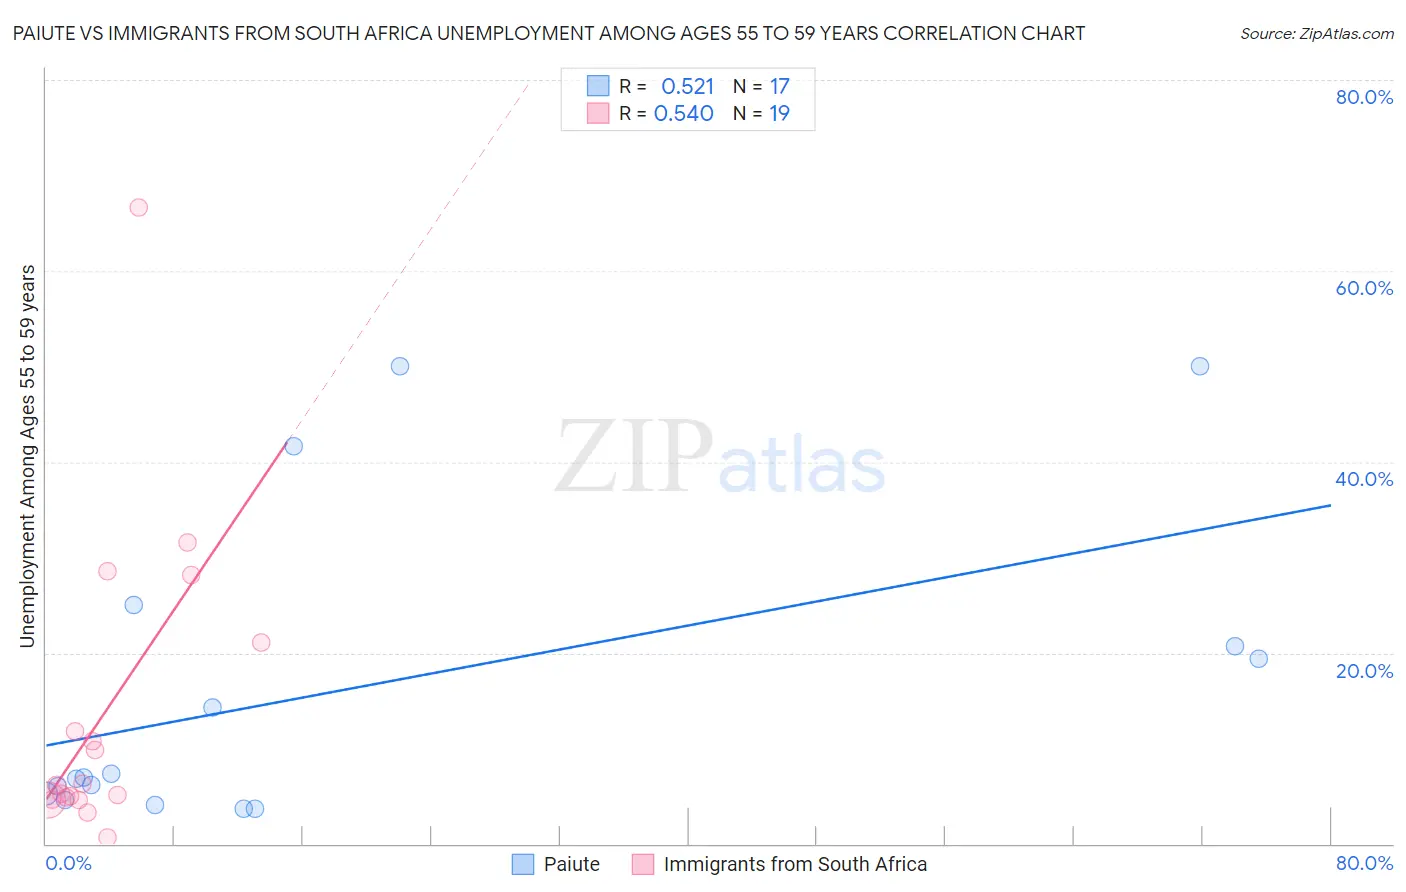 Paiute vs Immigrants from South Africa Unemployment Among Ages 55 to 59 years